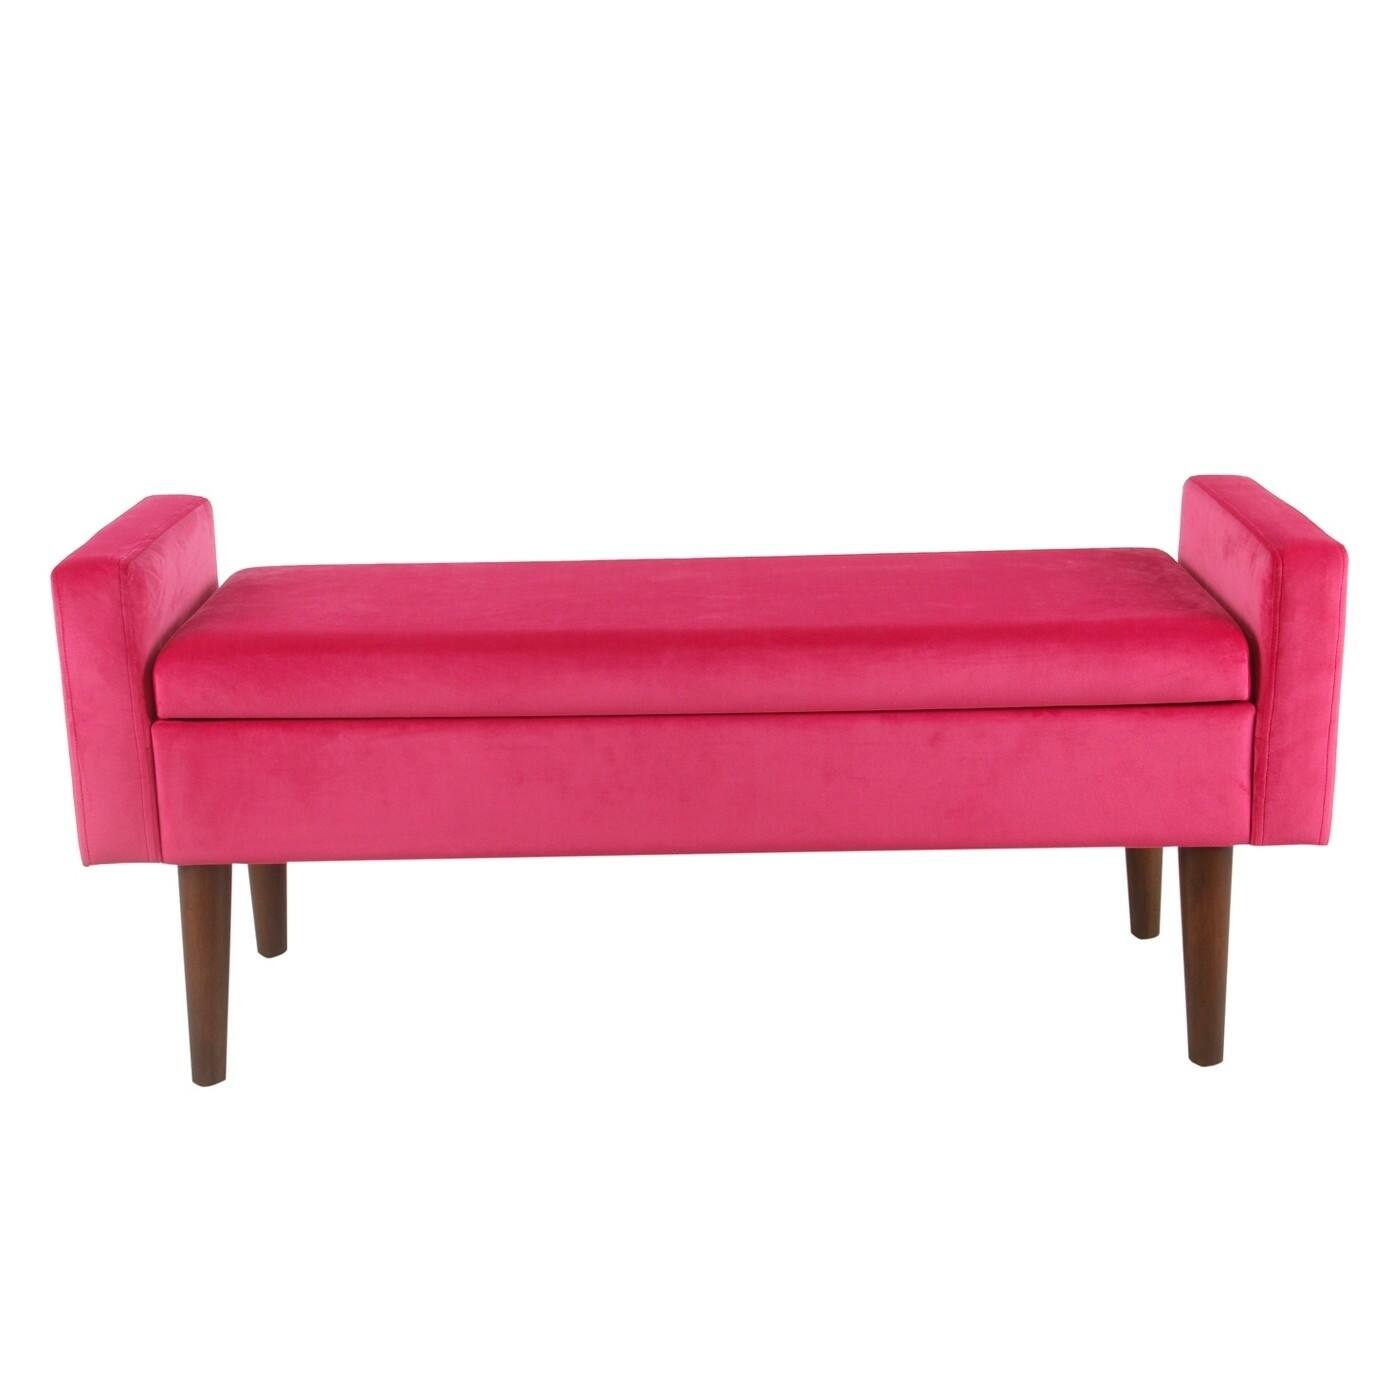 Velvet Upholstered Wooden Bench with Tapered Legs and Track Armrest, Pink